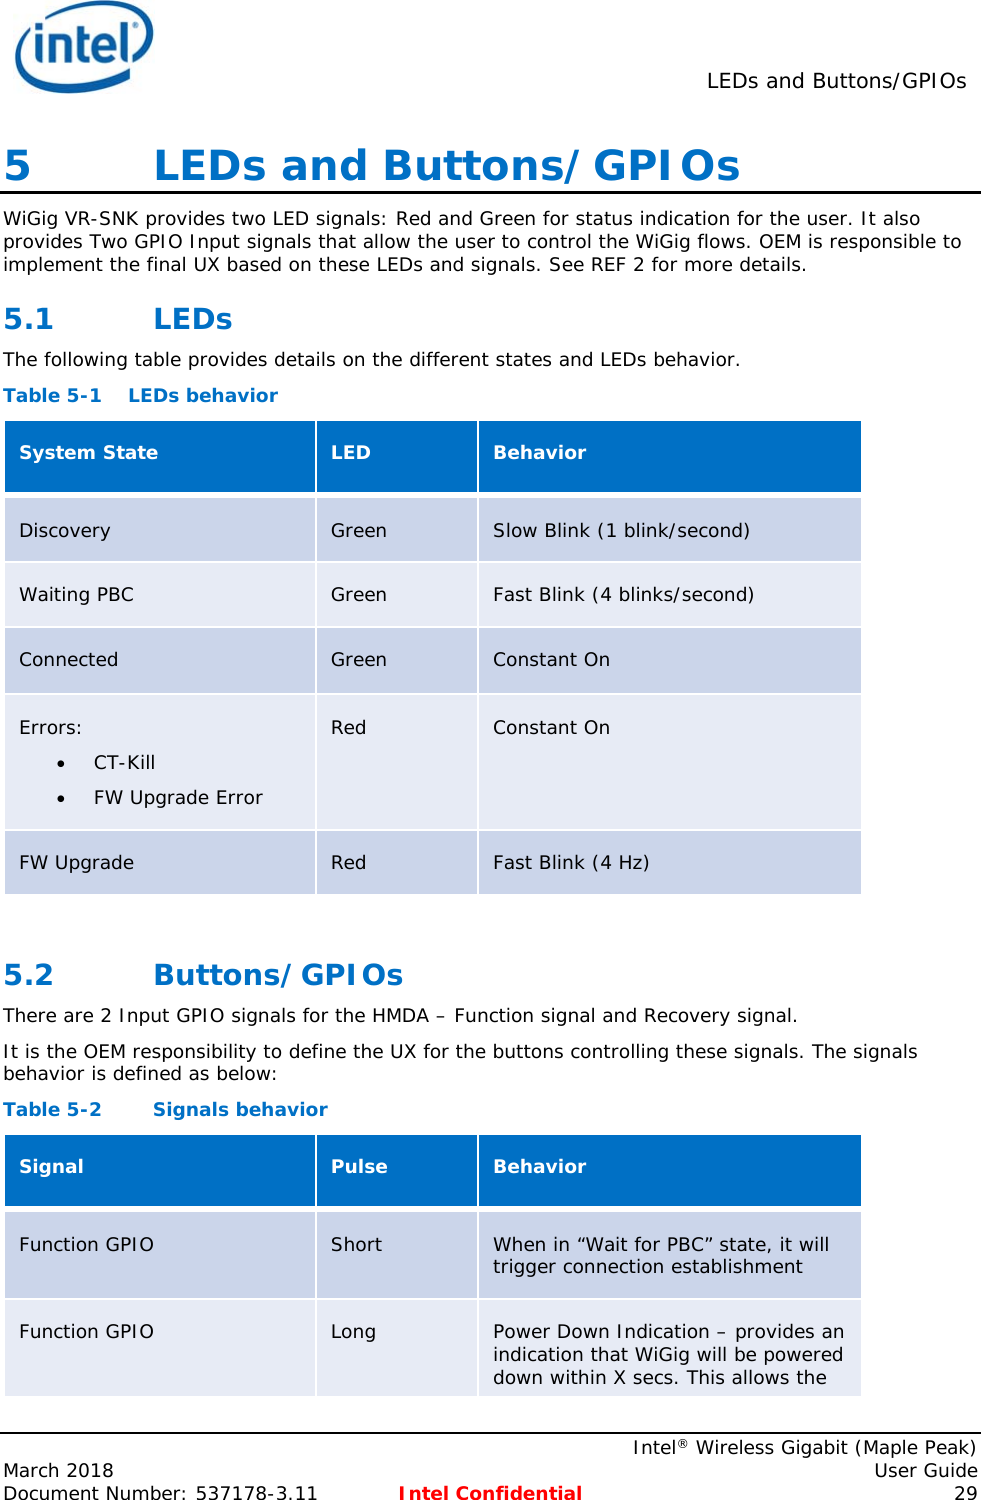  LEDs and Buttons/GPIOs    Intel® Wireless Gigabit (Maple Peak) March 2018    User Guide Document Number: 537178-3.11  Intel Confidential 29 5   LEDs and Buttons/GPIOs WiGig VR-SNK provides two LED signals: Red and Green for status indication for the user. It also provides Two GPIO Input signals that allow the user to control the WiGig flows. OEM is responsible to implement the final UX based on these LEDs and signals. See REF 2 for more details. 5.1 LEDs The following table provides details on the different states and LEDs behavior. Table 5-1    LEDs behavior System State  LED  Behavior Discovery  Green  Slow Blink (1 blink/second) Waiting PBC  Green  Fast Blink (4 blinks/second) Connected  Green  Constant On Errors:  CT-Kill  FW Upgrade Error Red  Constant On FW Upgrade  Red  Fast Blink (4 Hz)  5.2 Buttons/GPIOs There are 2 Input GPIO signals for the HMDA – Function signal and Recovery signal. It is the OEM responsibility to define the UX for the buttons controlling these signals. The signals behavior is defined as below:  Table 5-2  Signals behavior Signal  Pulse  Behavior Function GPIO  Short  When in “Wait for PBC” state, it will trigger connection establishment Function GPIO  Long  Power Down Indication – provides an indication that WiGig will be powered down within X secs. This allows the 